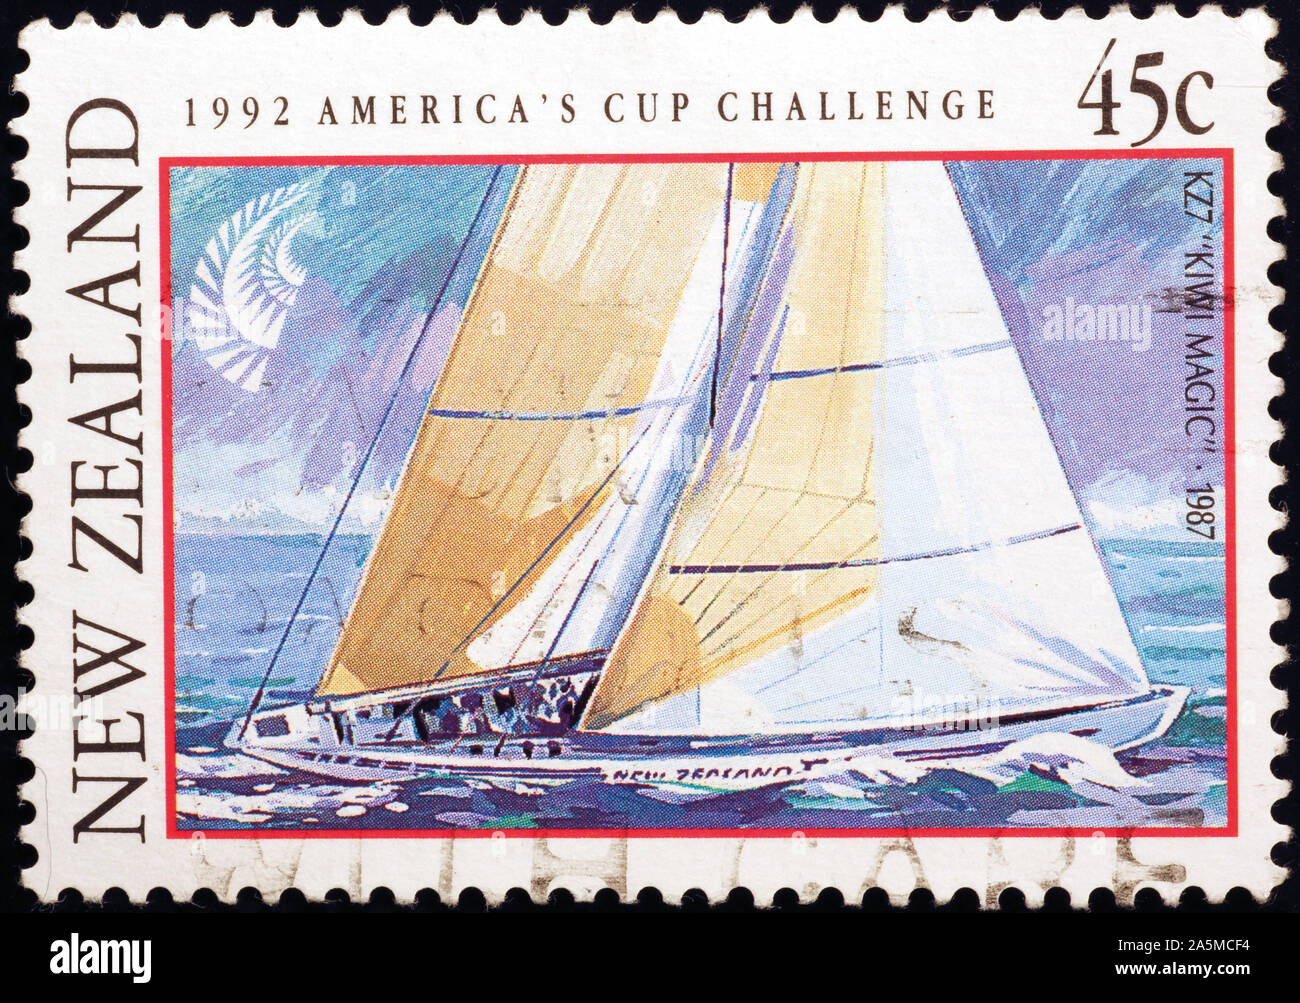 Sailboat racing on New Zealand postage stamp Stock Photo